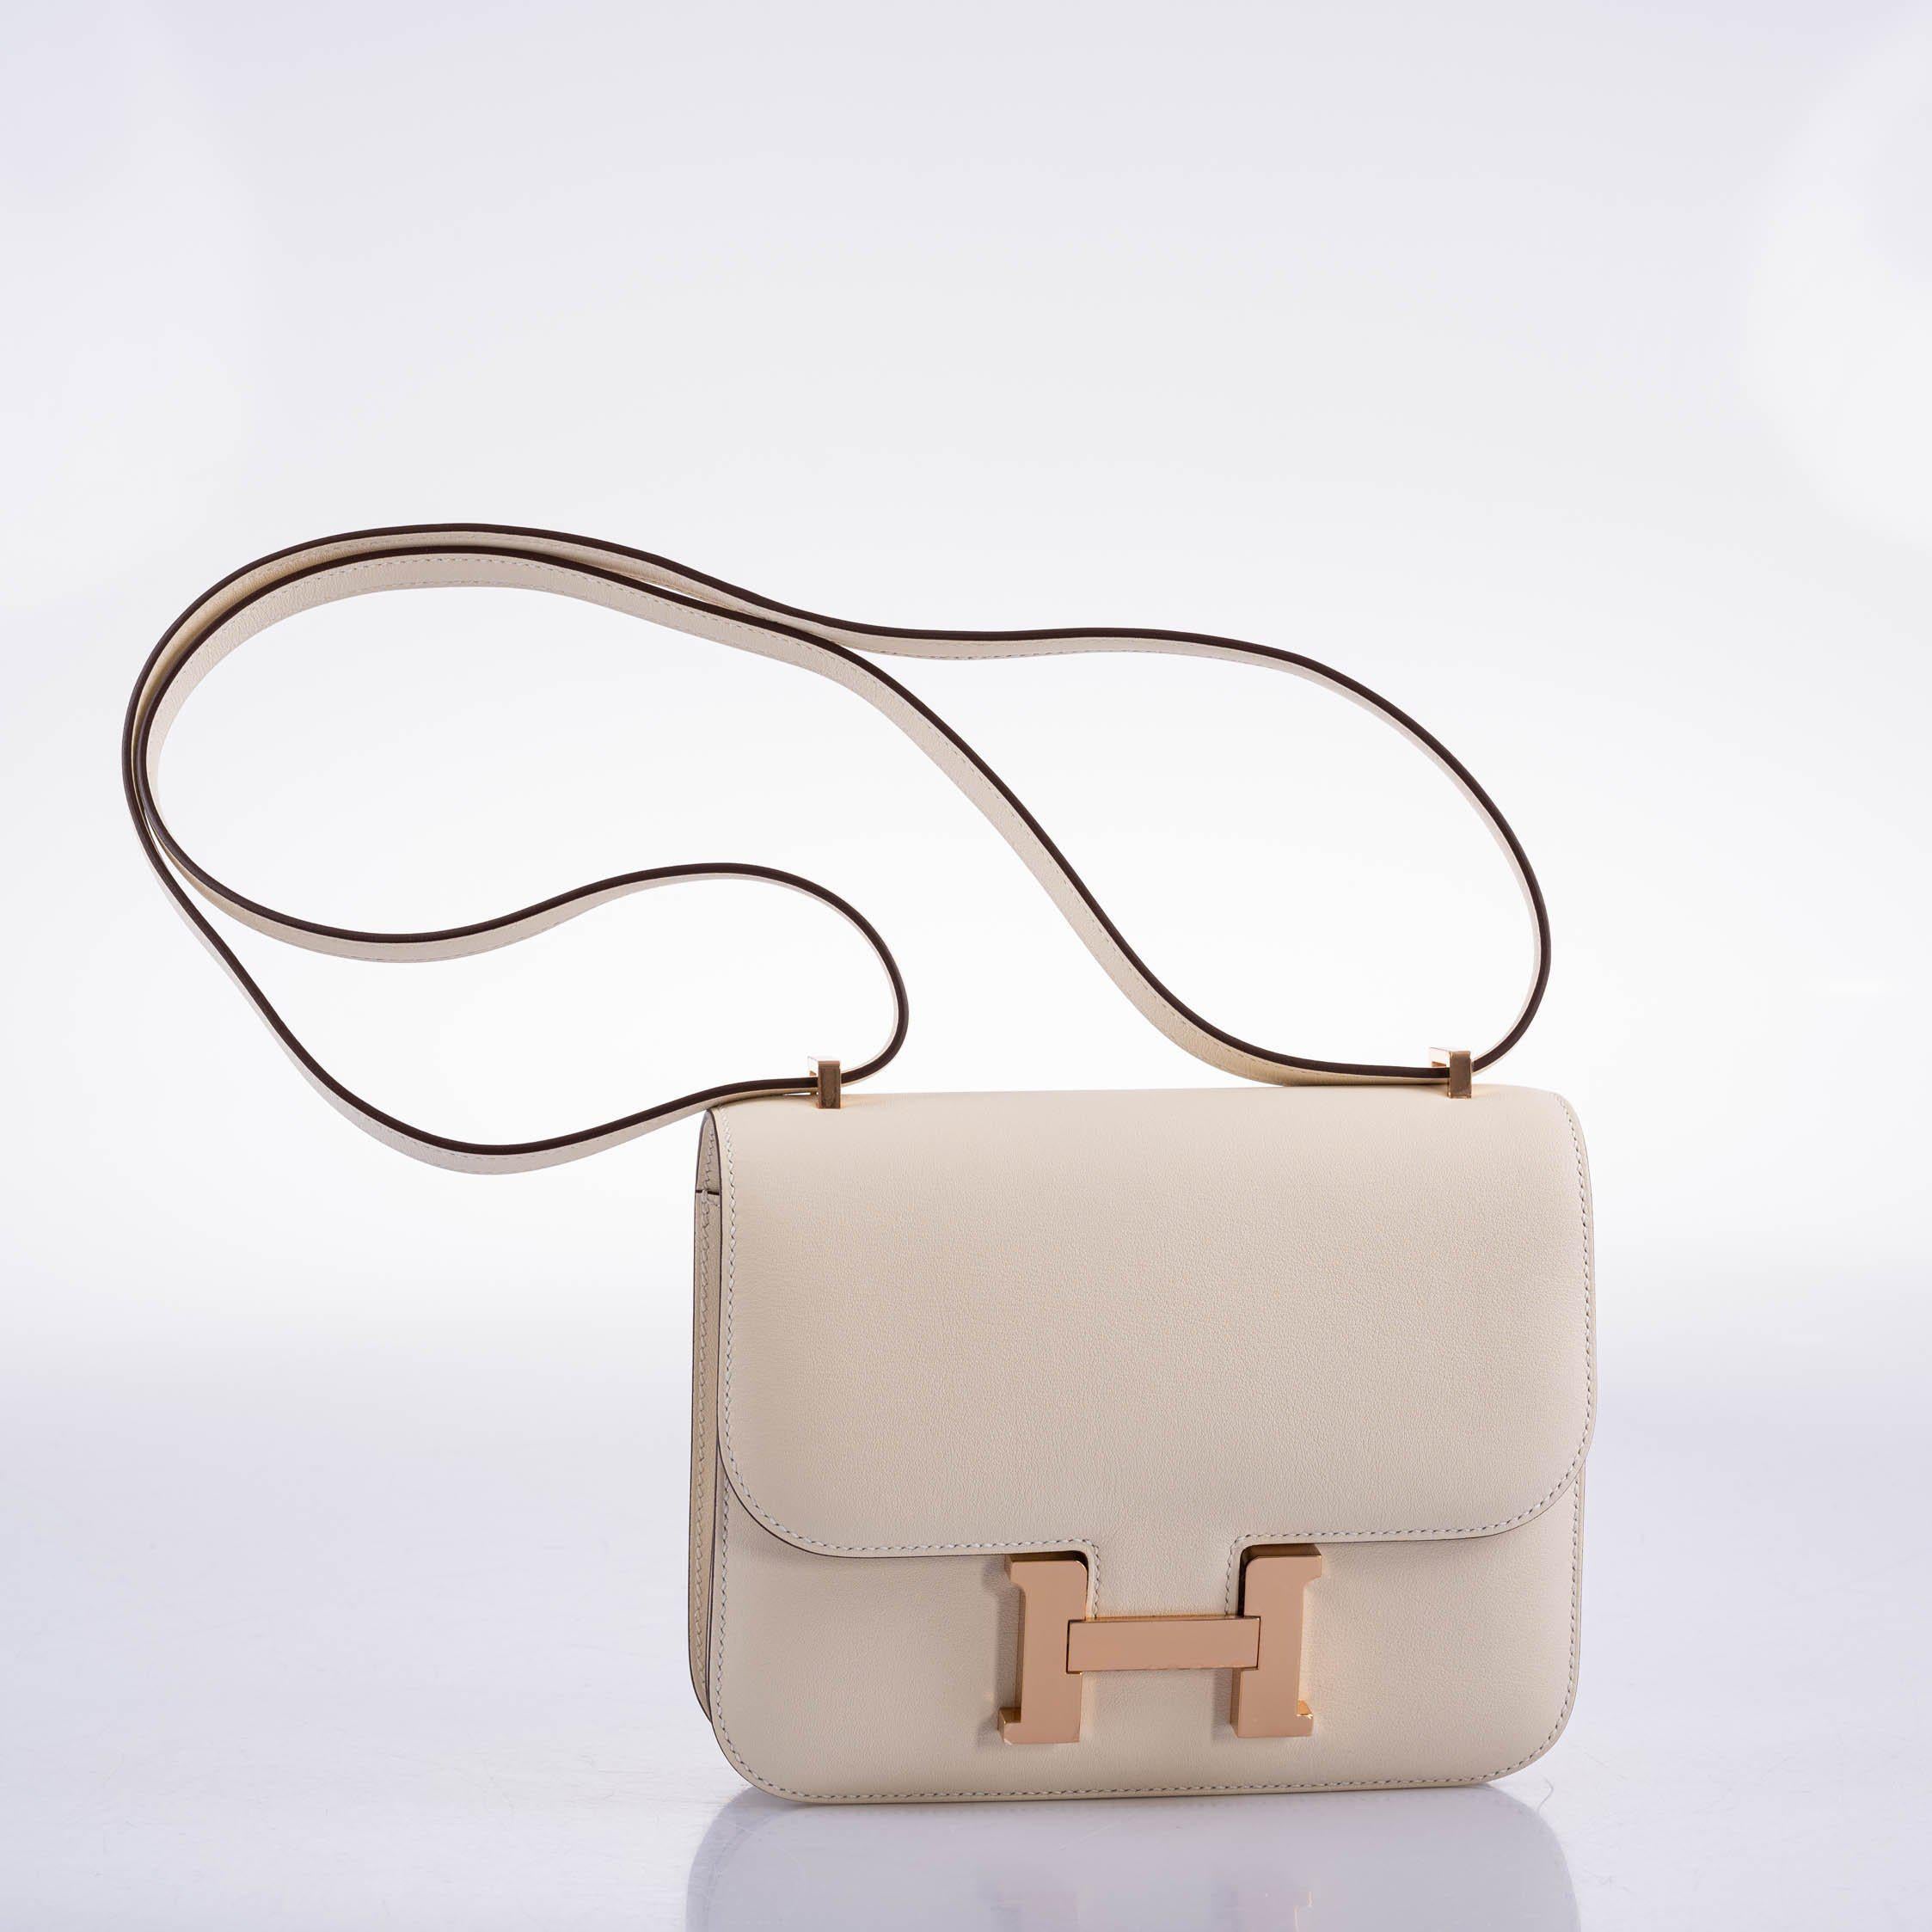 Hermès Constance 18 Nata Swift leather with Rose Gold Hardware - 2021, Z